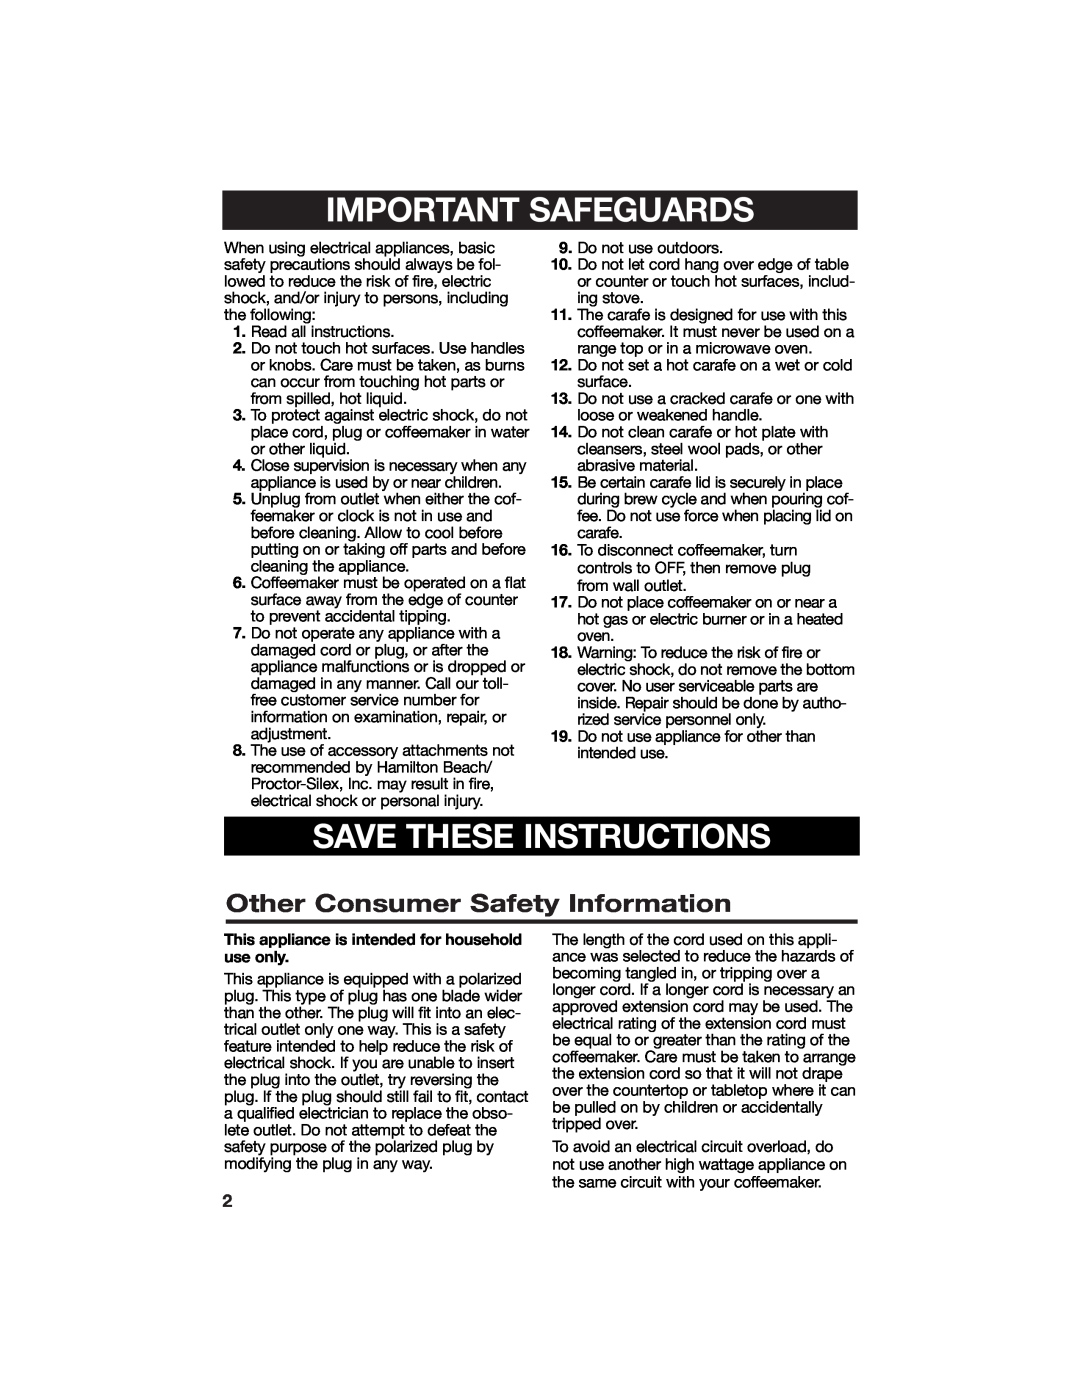 Hamilton Beach 840124800 manual Other Consumer Safety Information, Important Safeguards, Save These Instructions 